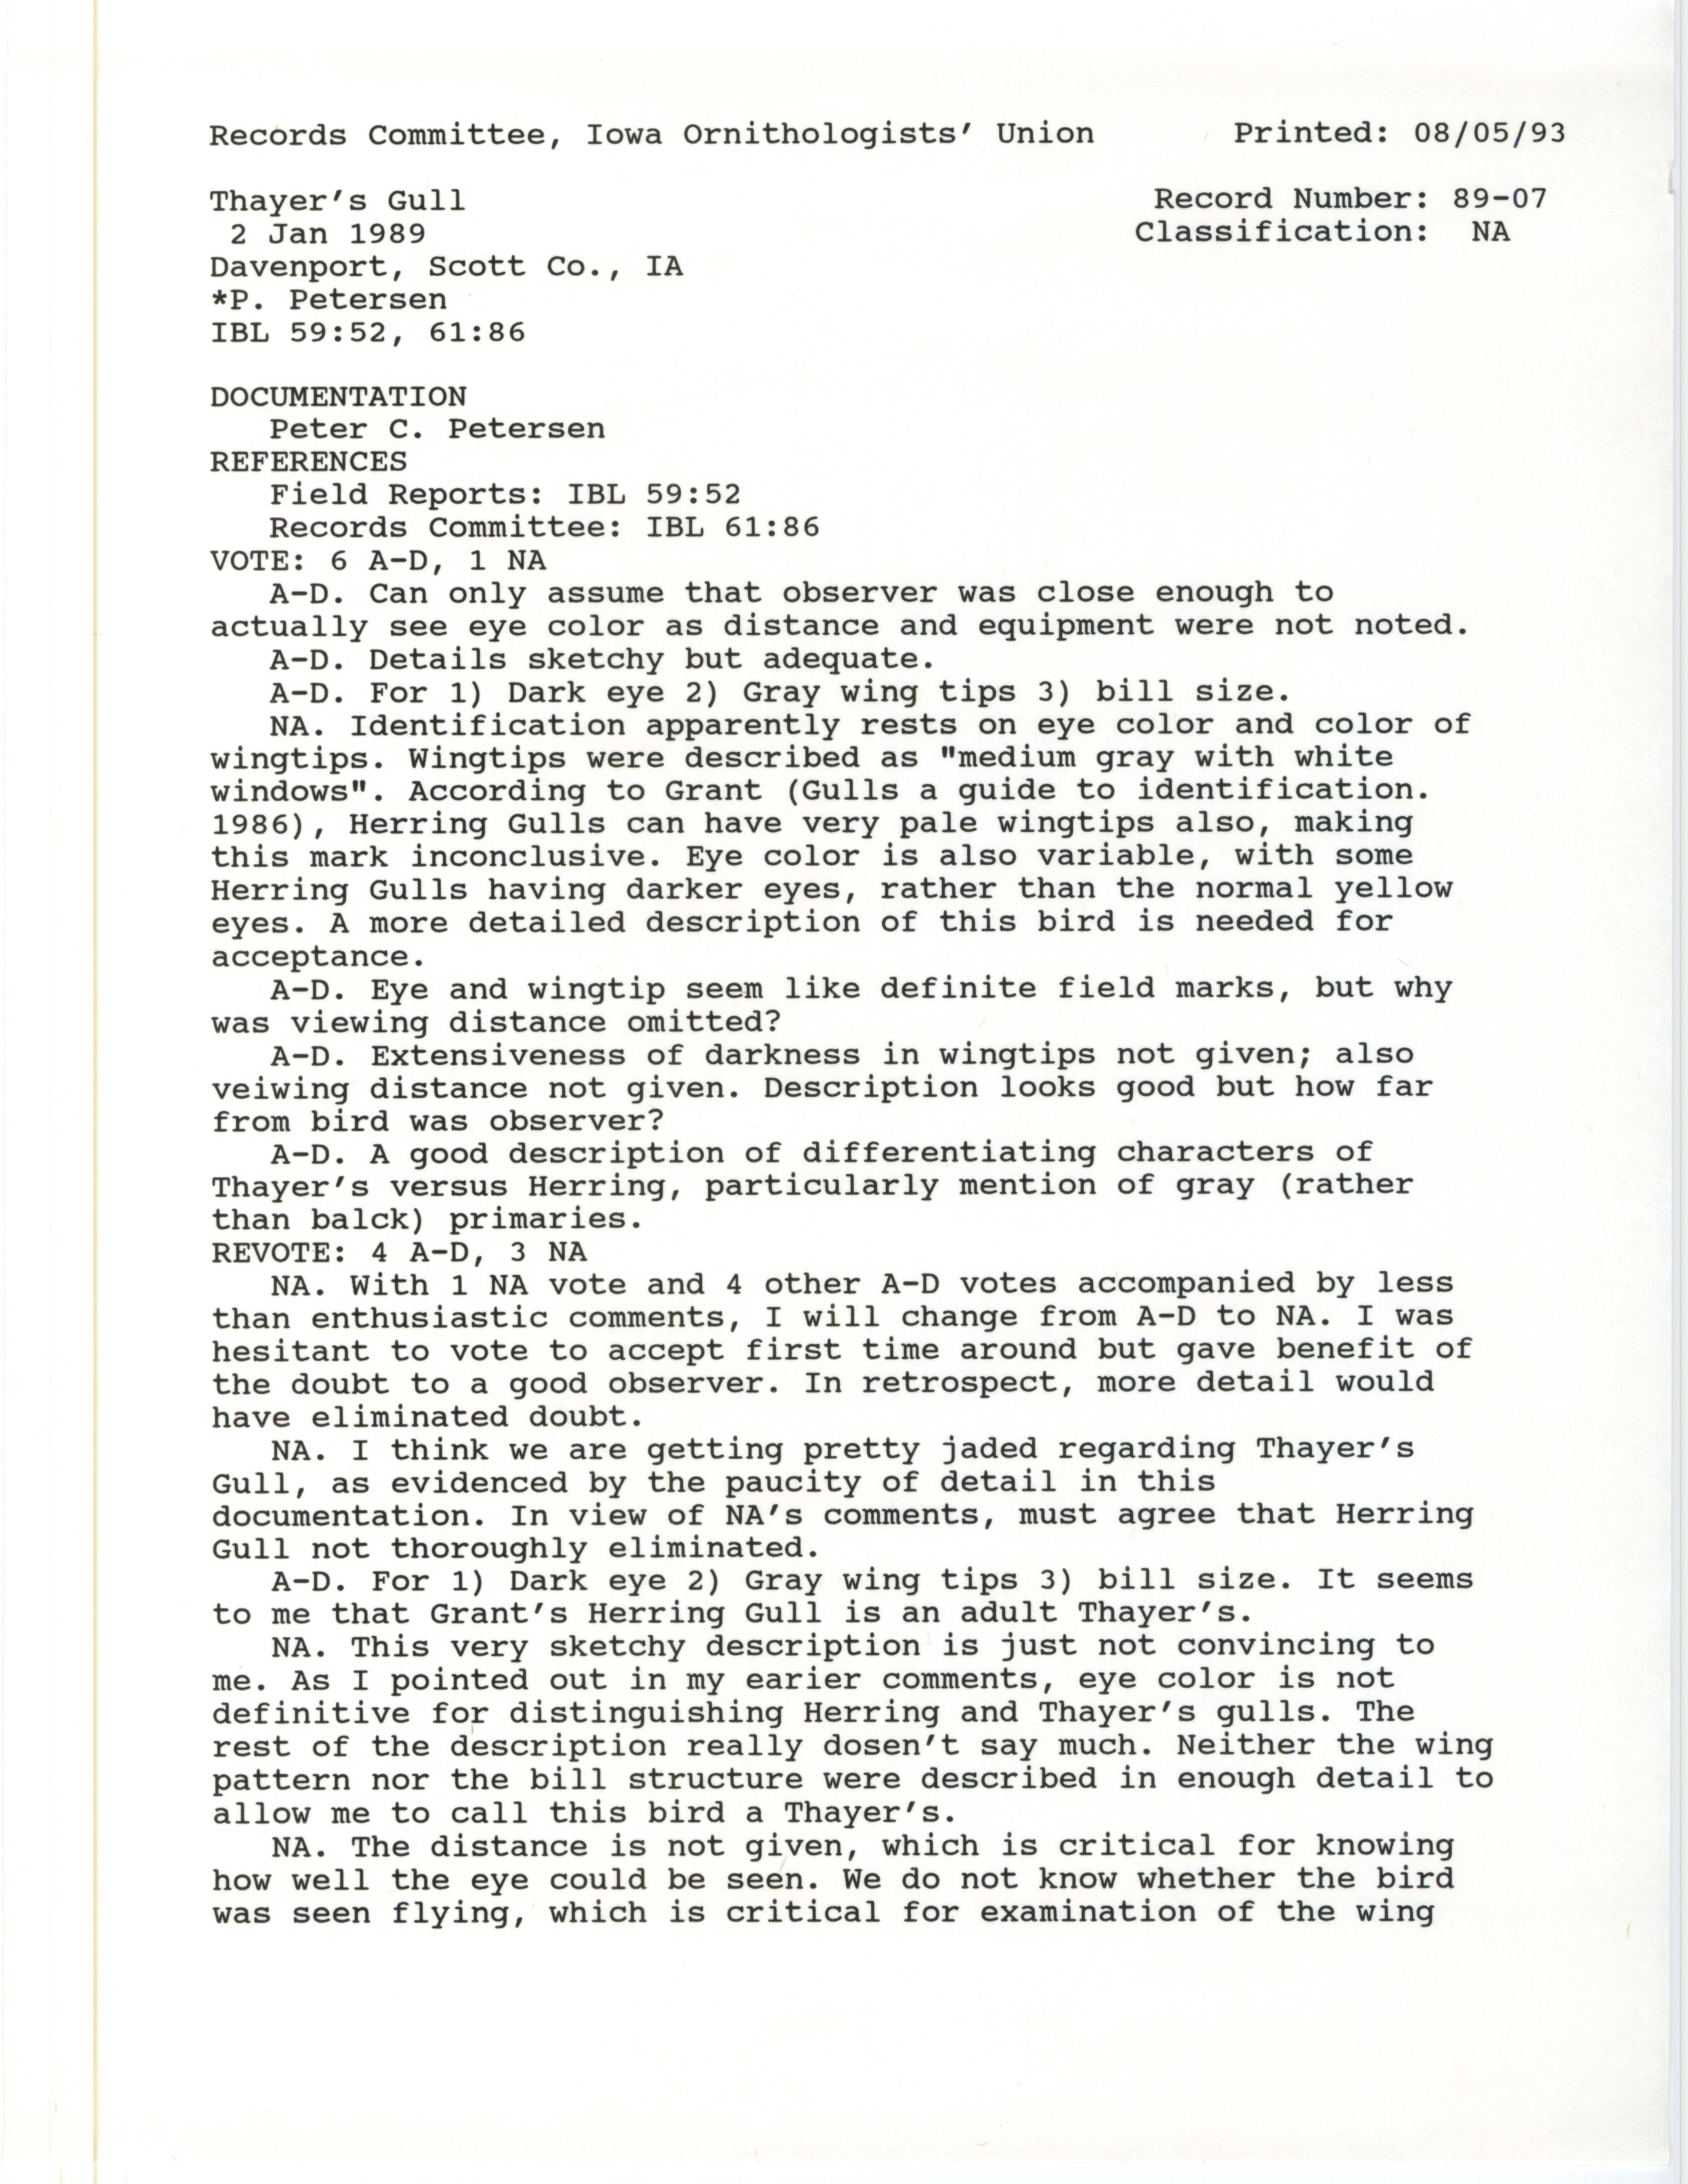 Records Committee review for rare bird sighting of Thayer's Gull near Horse Island near Davenport, 1989